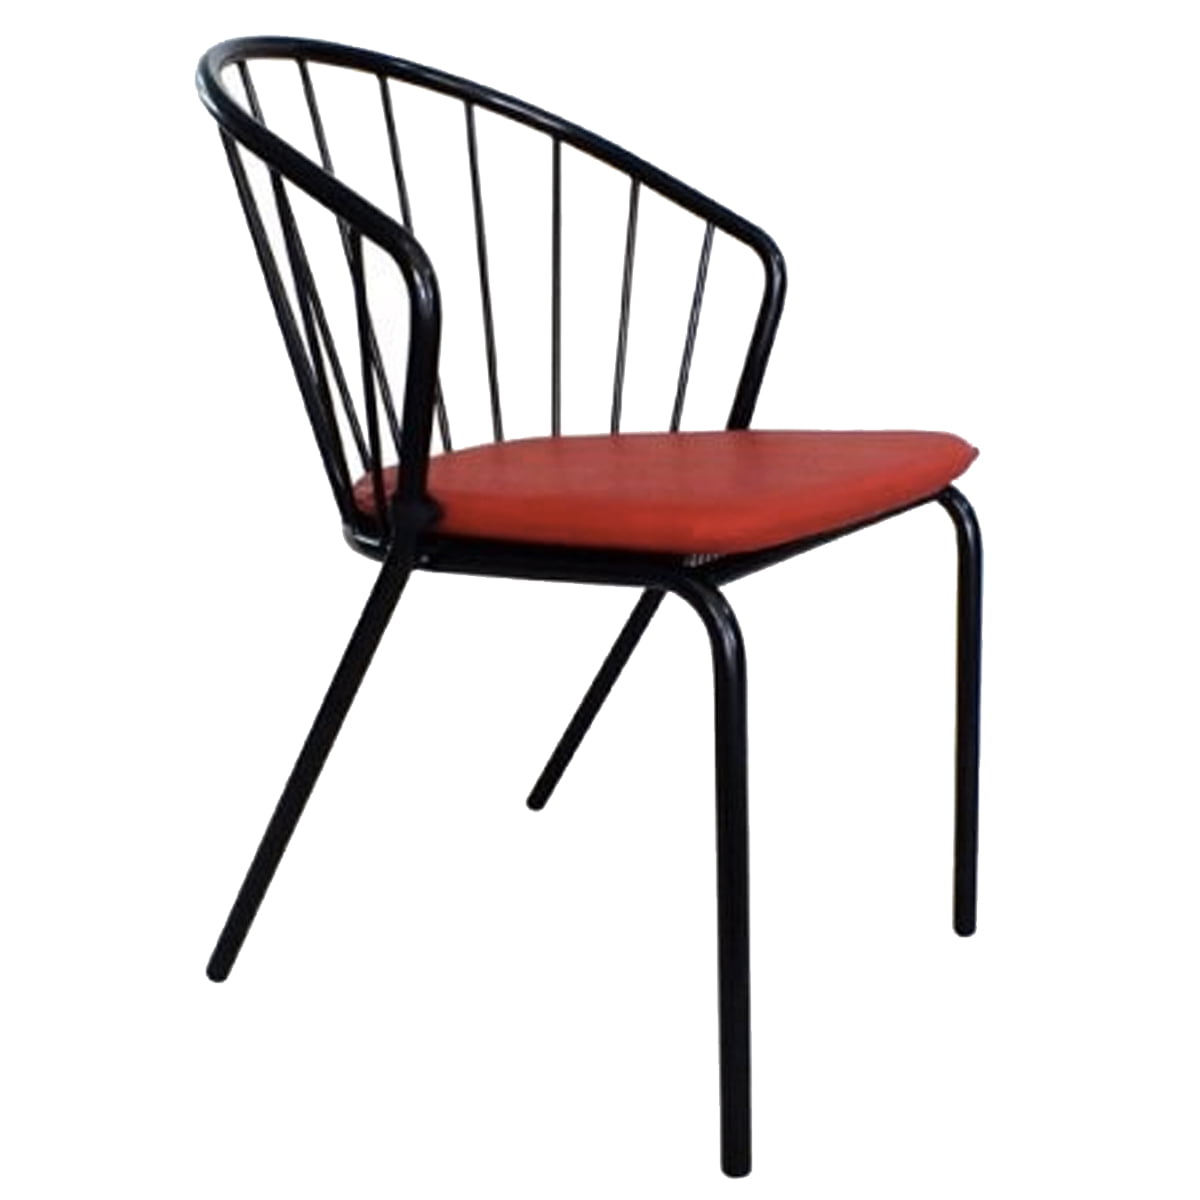 Wrought Iron Chair For Outdoor, Iron Chairs Outdoor